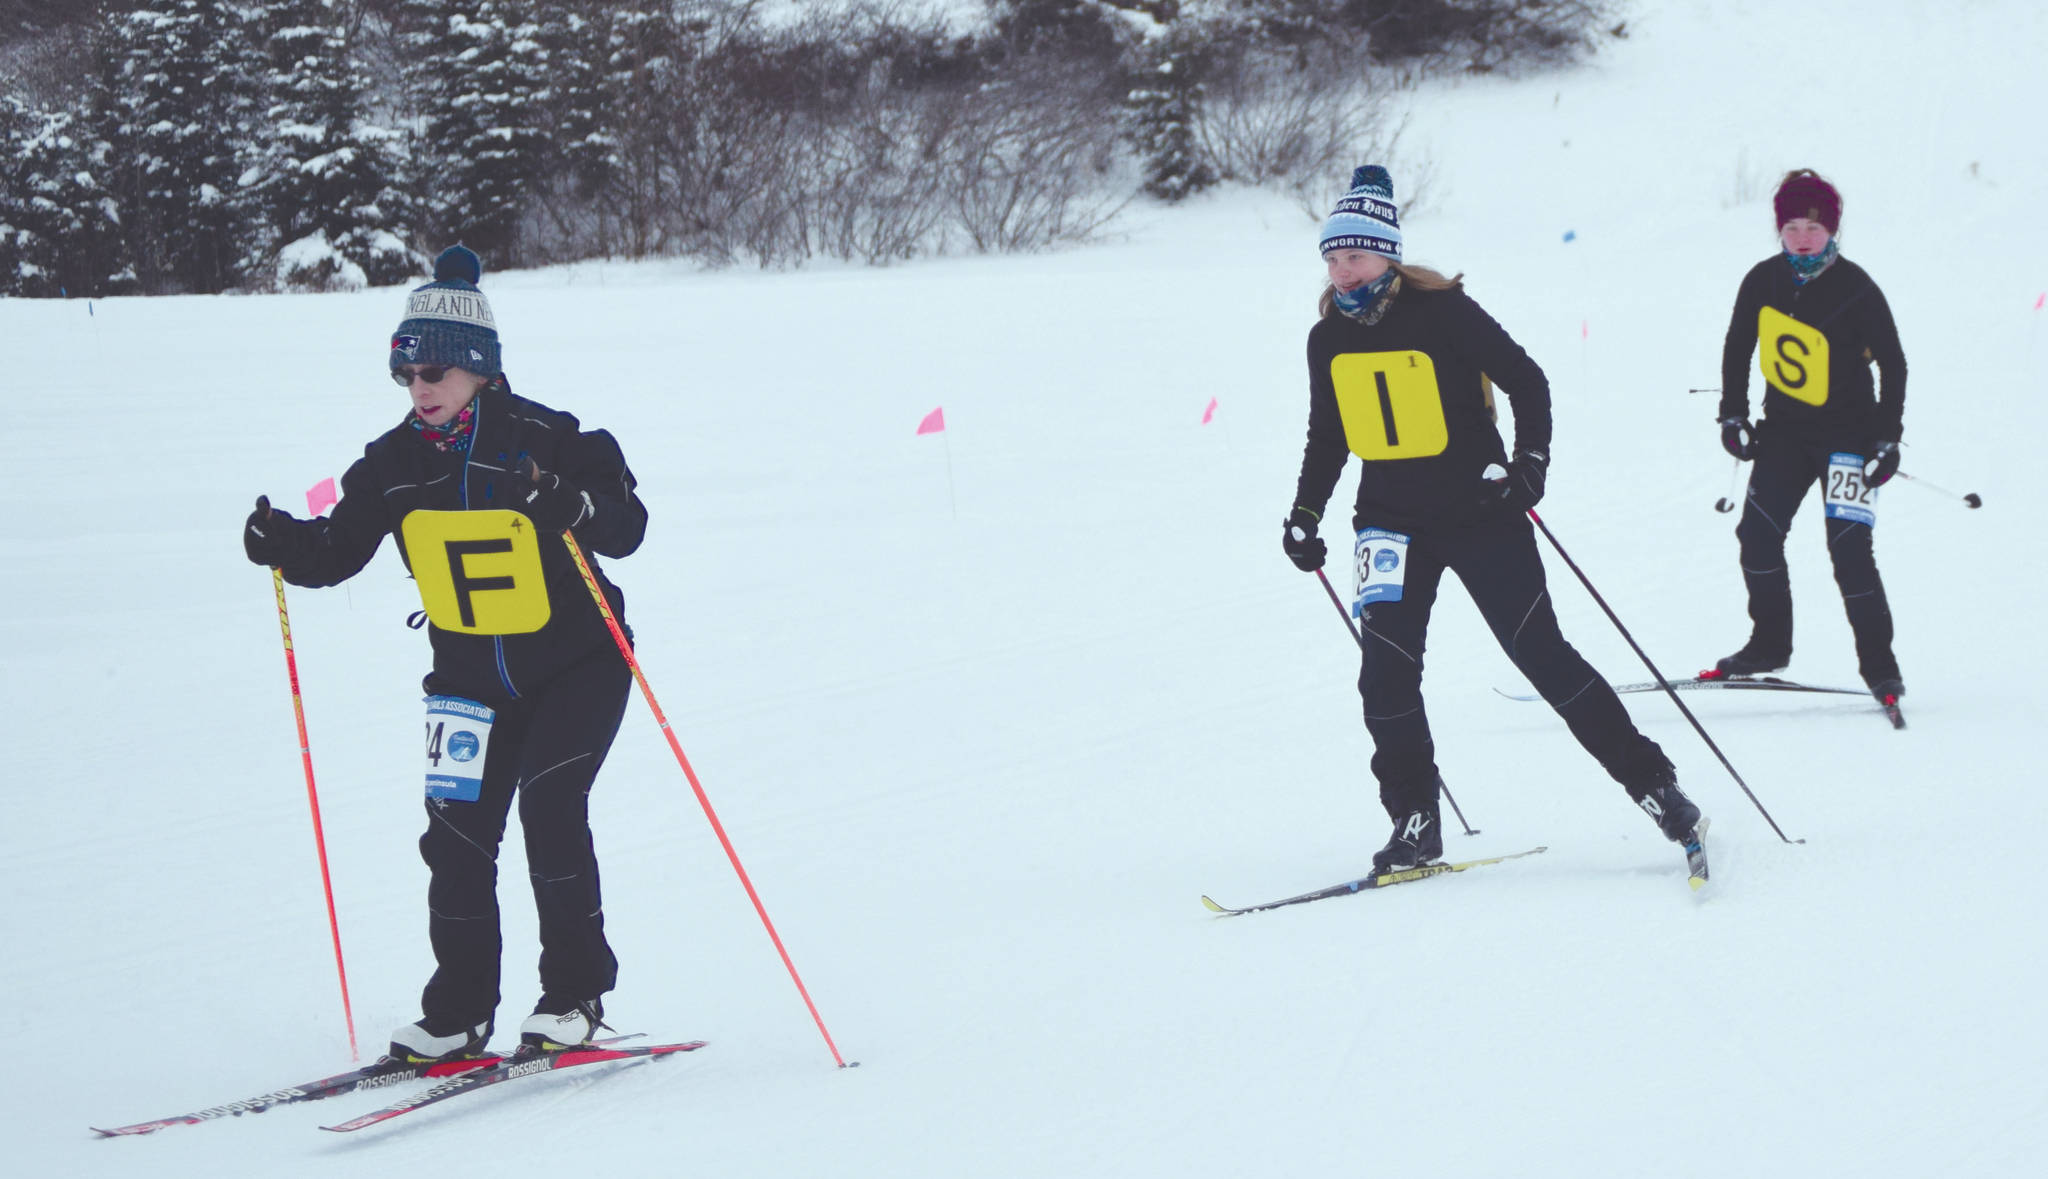 Patty Moran leads Madison McDonald and Audrey McDonald at the Ski for Women on Sunday, Feb. 2, 2020, at Tsalteshi Trails just outside of Soldotna, Alaska. The three wore tiles for a group costume inspired by the app Words With Friends. (Photo by Jeff Helminiak/Peninsula Clarion)